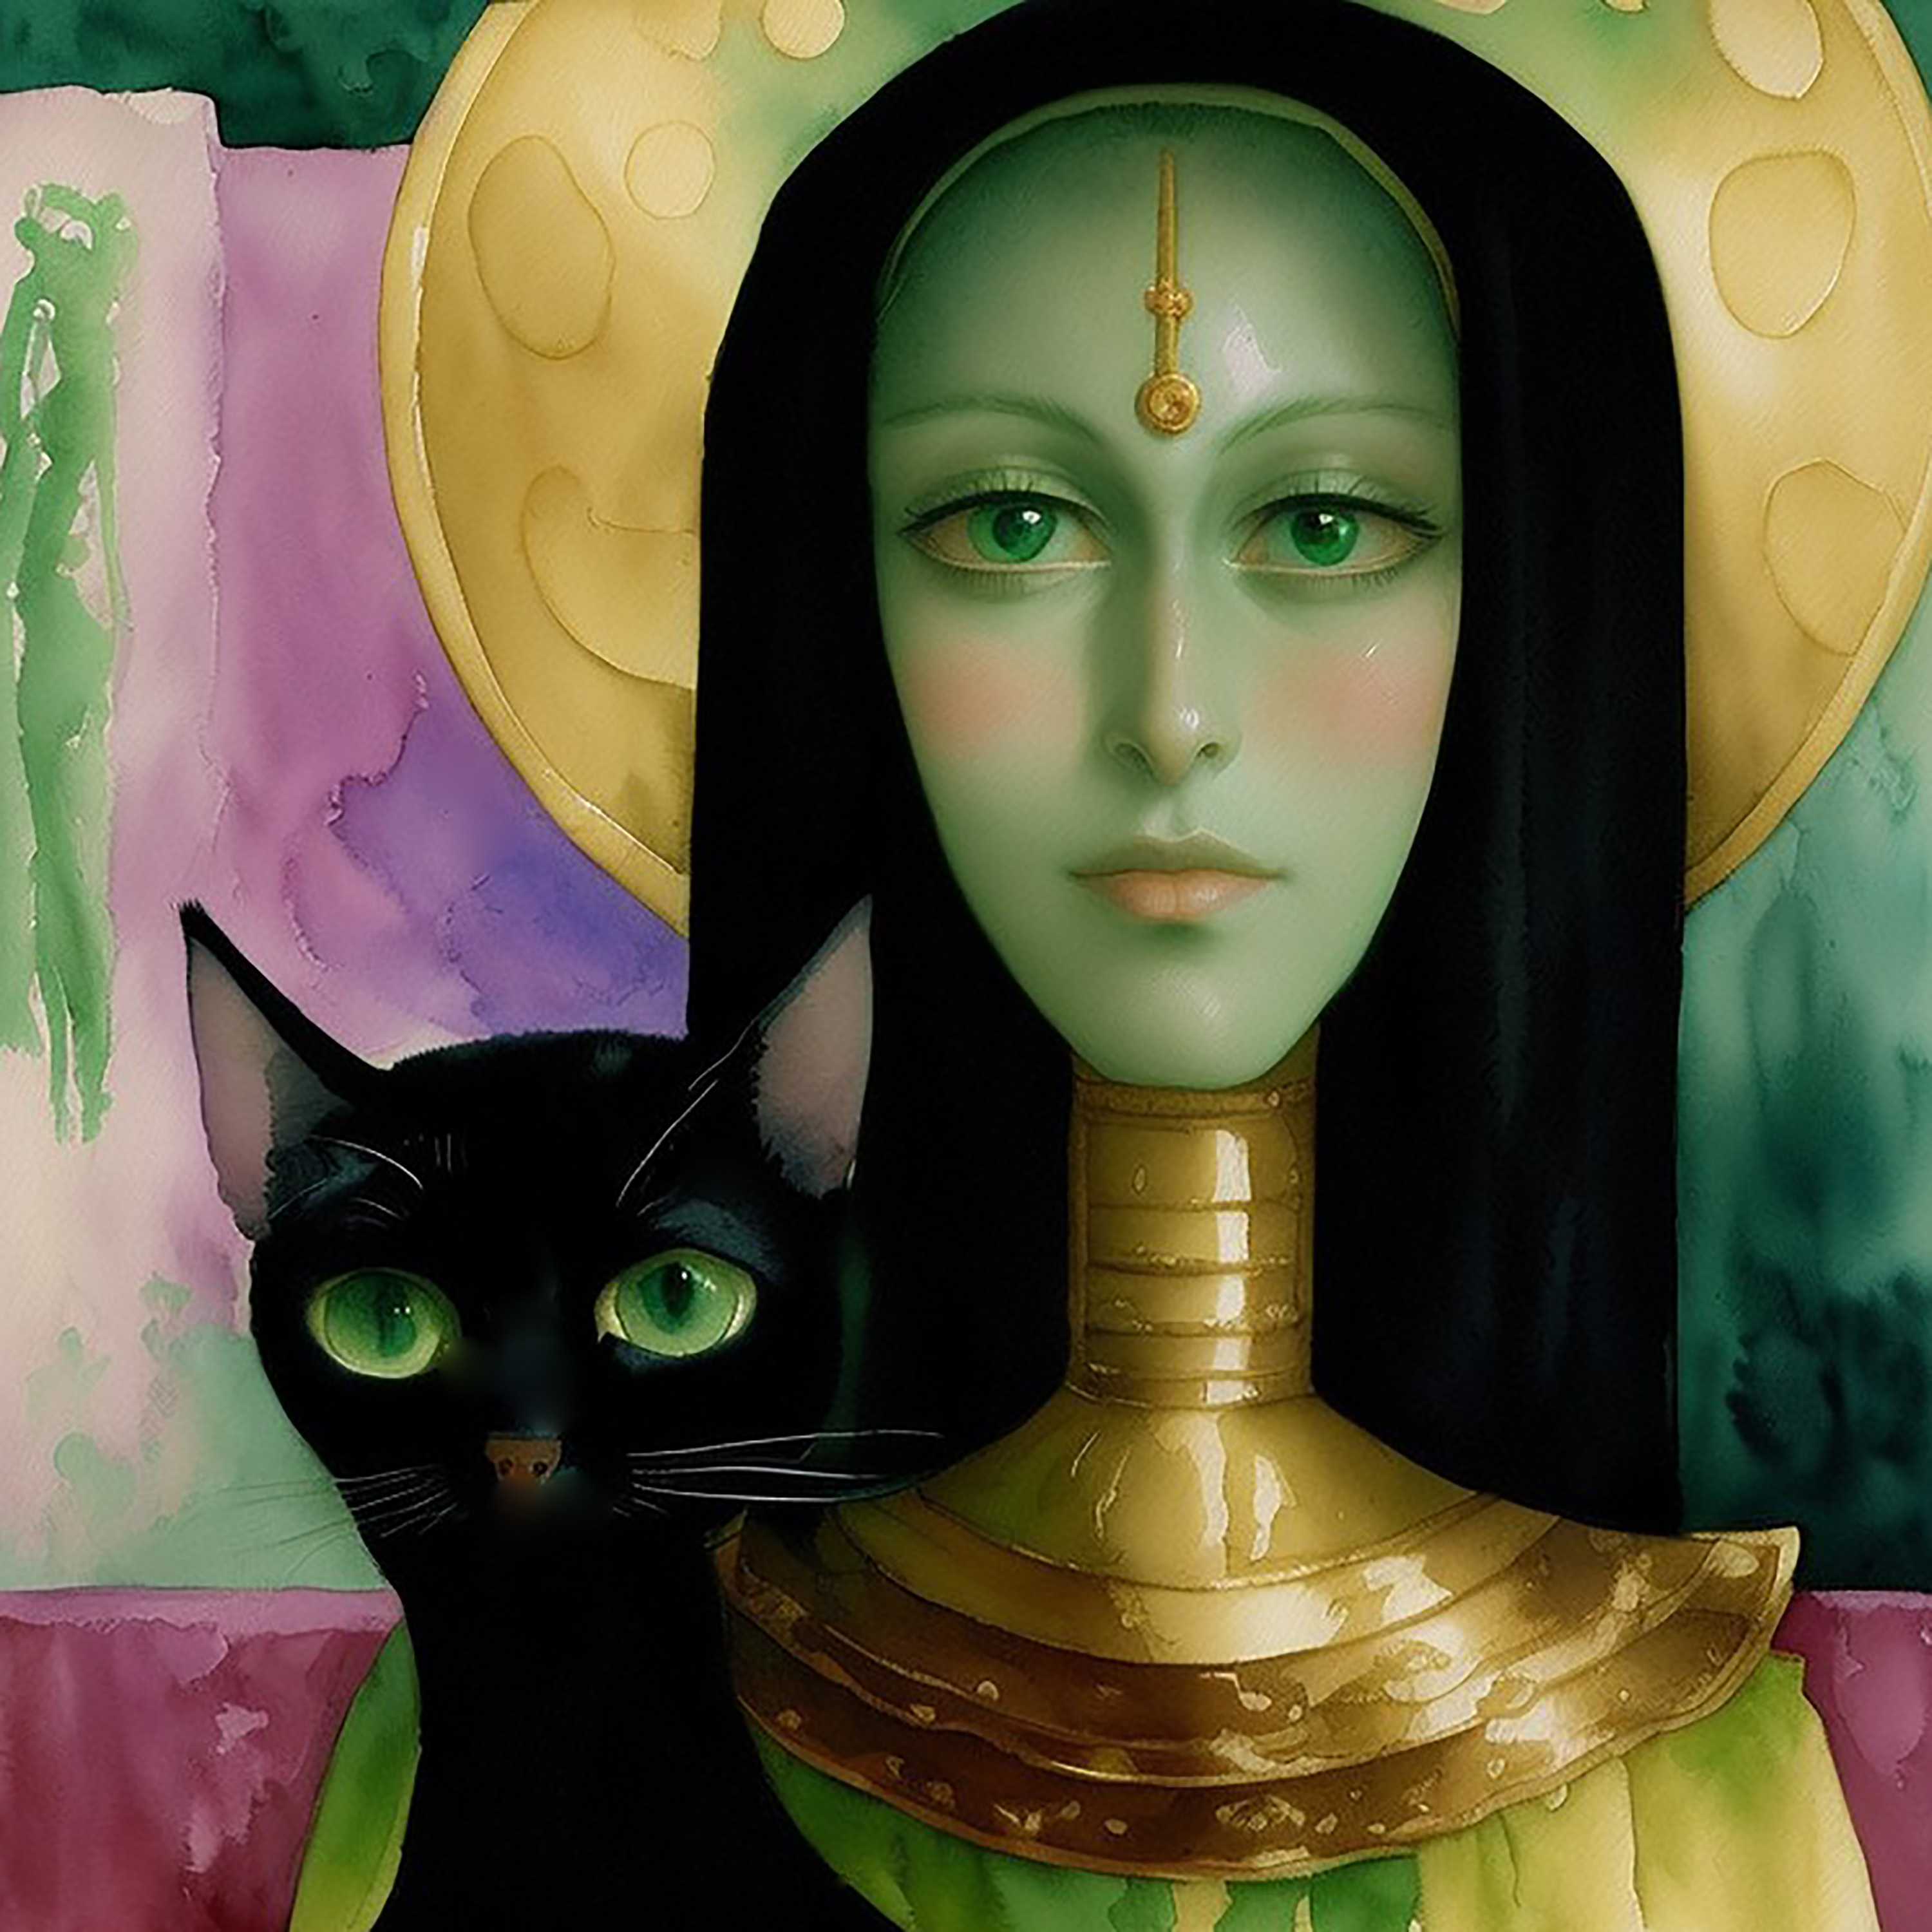 Green madonna and her cat e658f 10x10 300 z01vg5